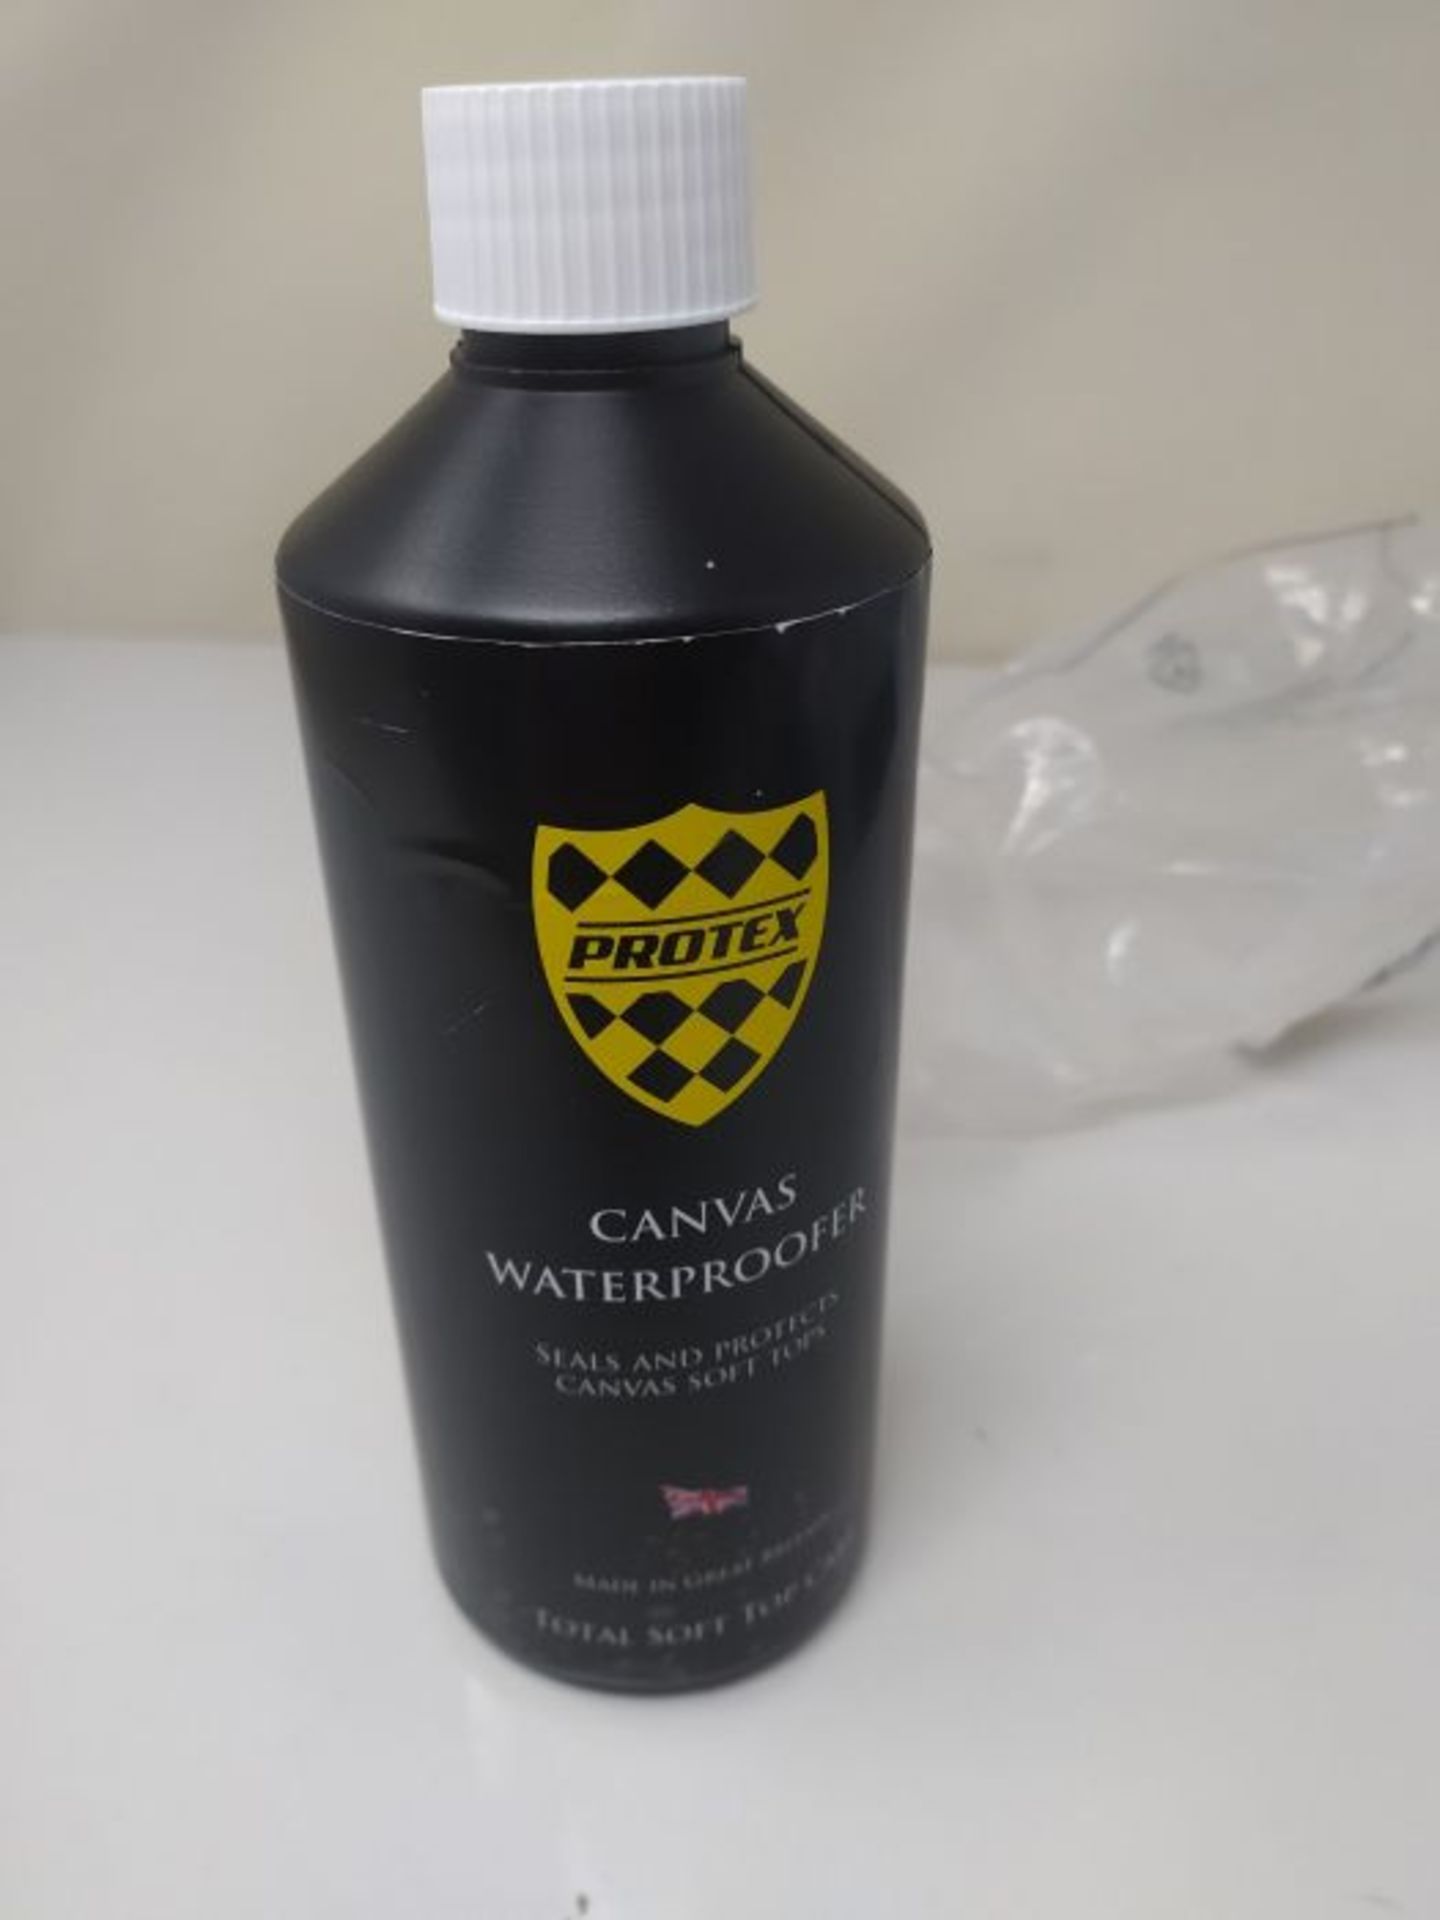 Protex World Convertible Soft Top Care Kit with Canvas Cleaner & Waterproofer - 500ml, - Image 2 of 2